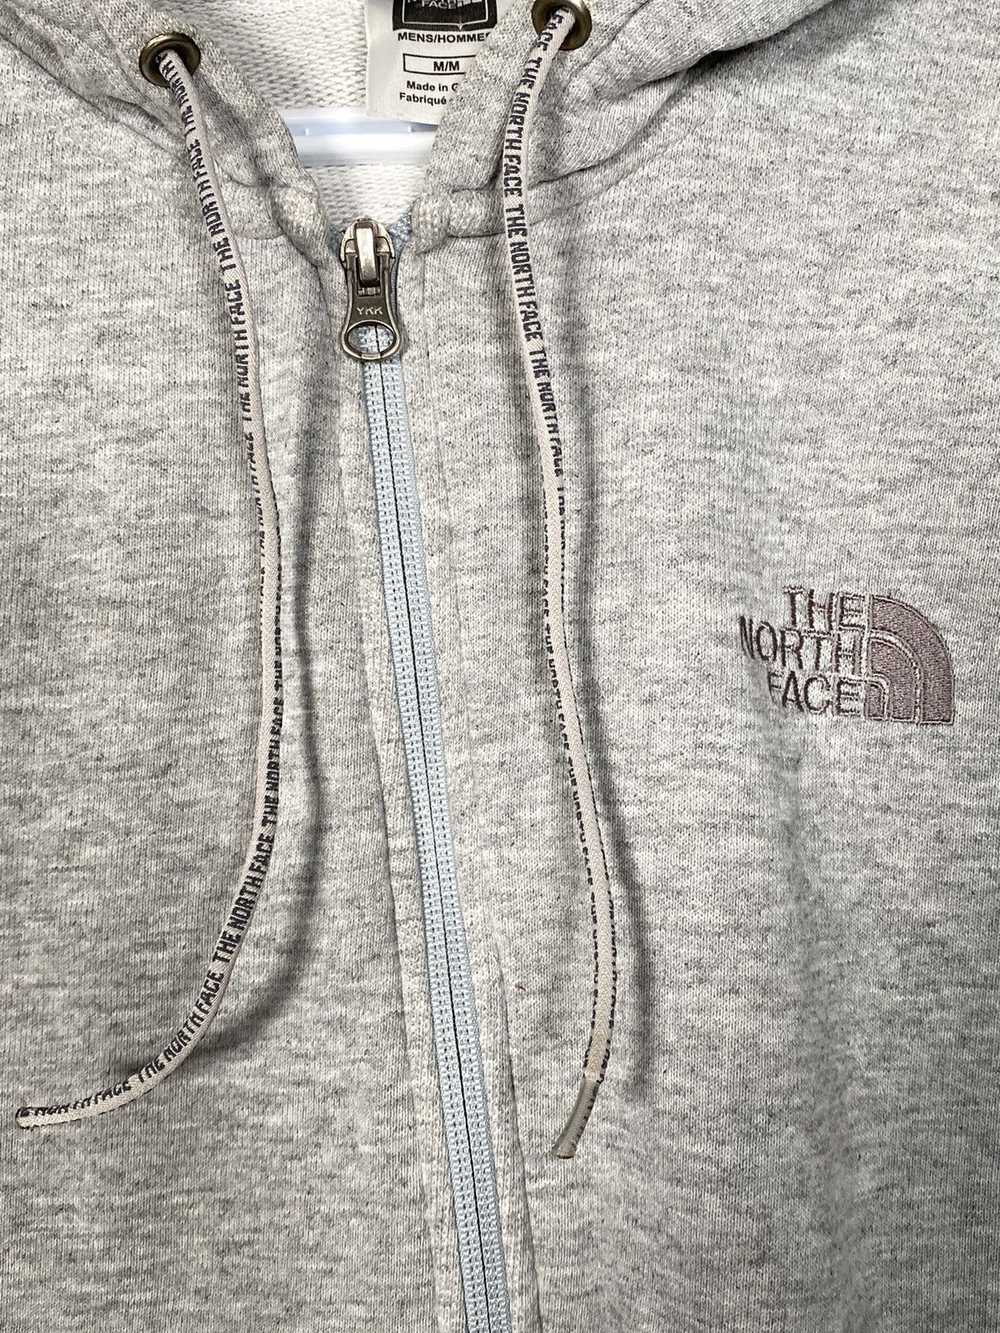 The North Face Fleece Full Zip Hoodie Made in Gre… - image 4